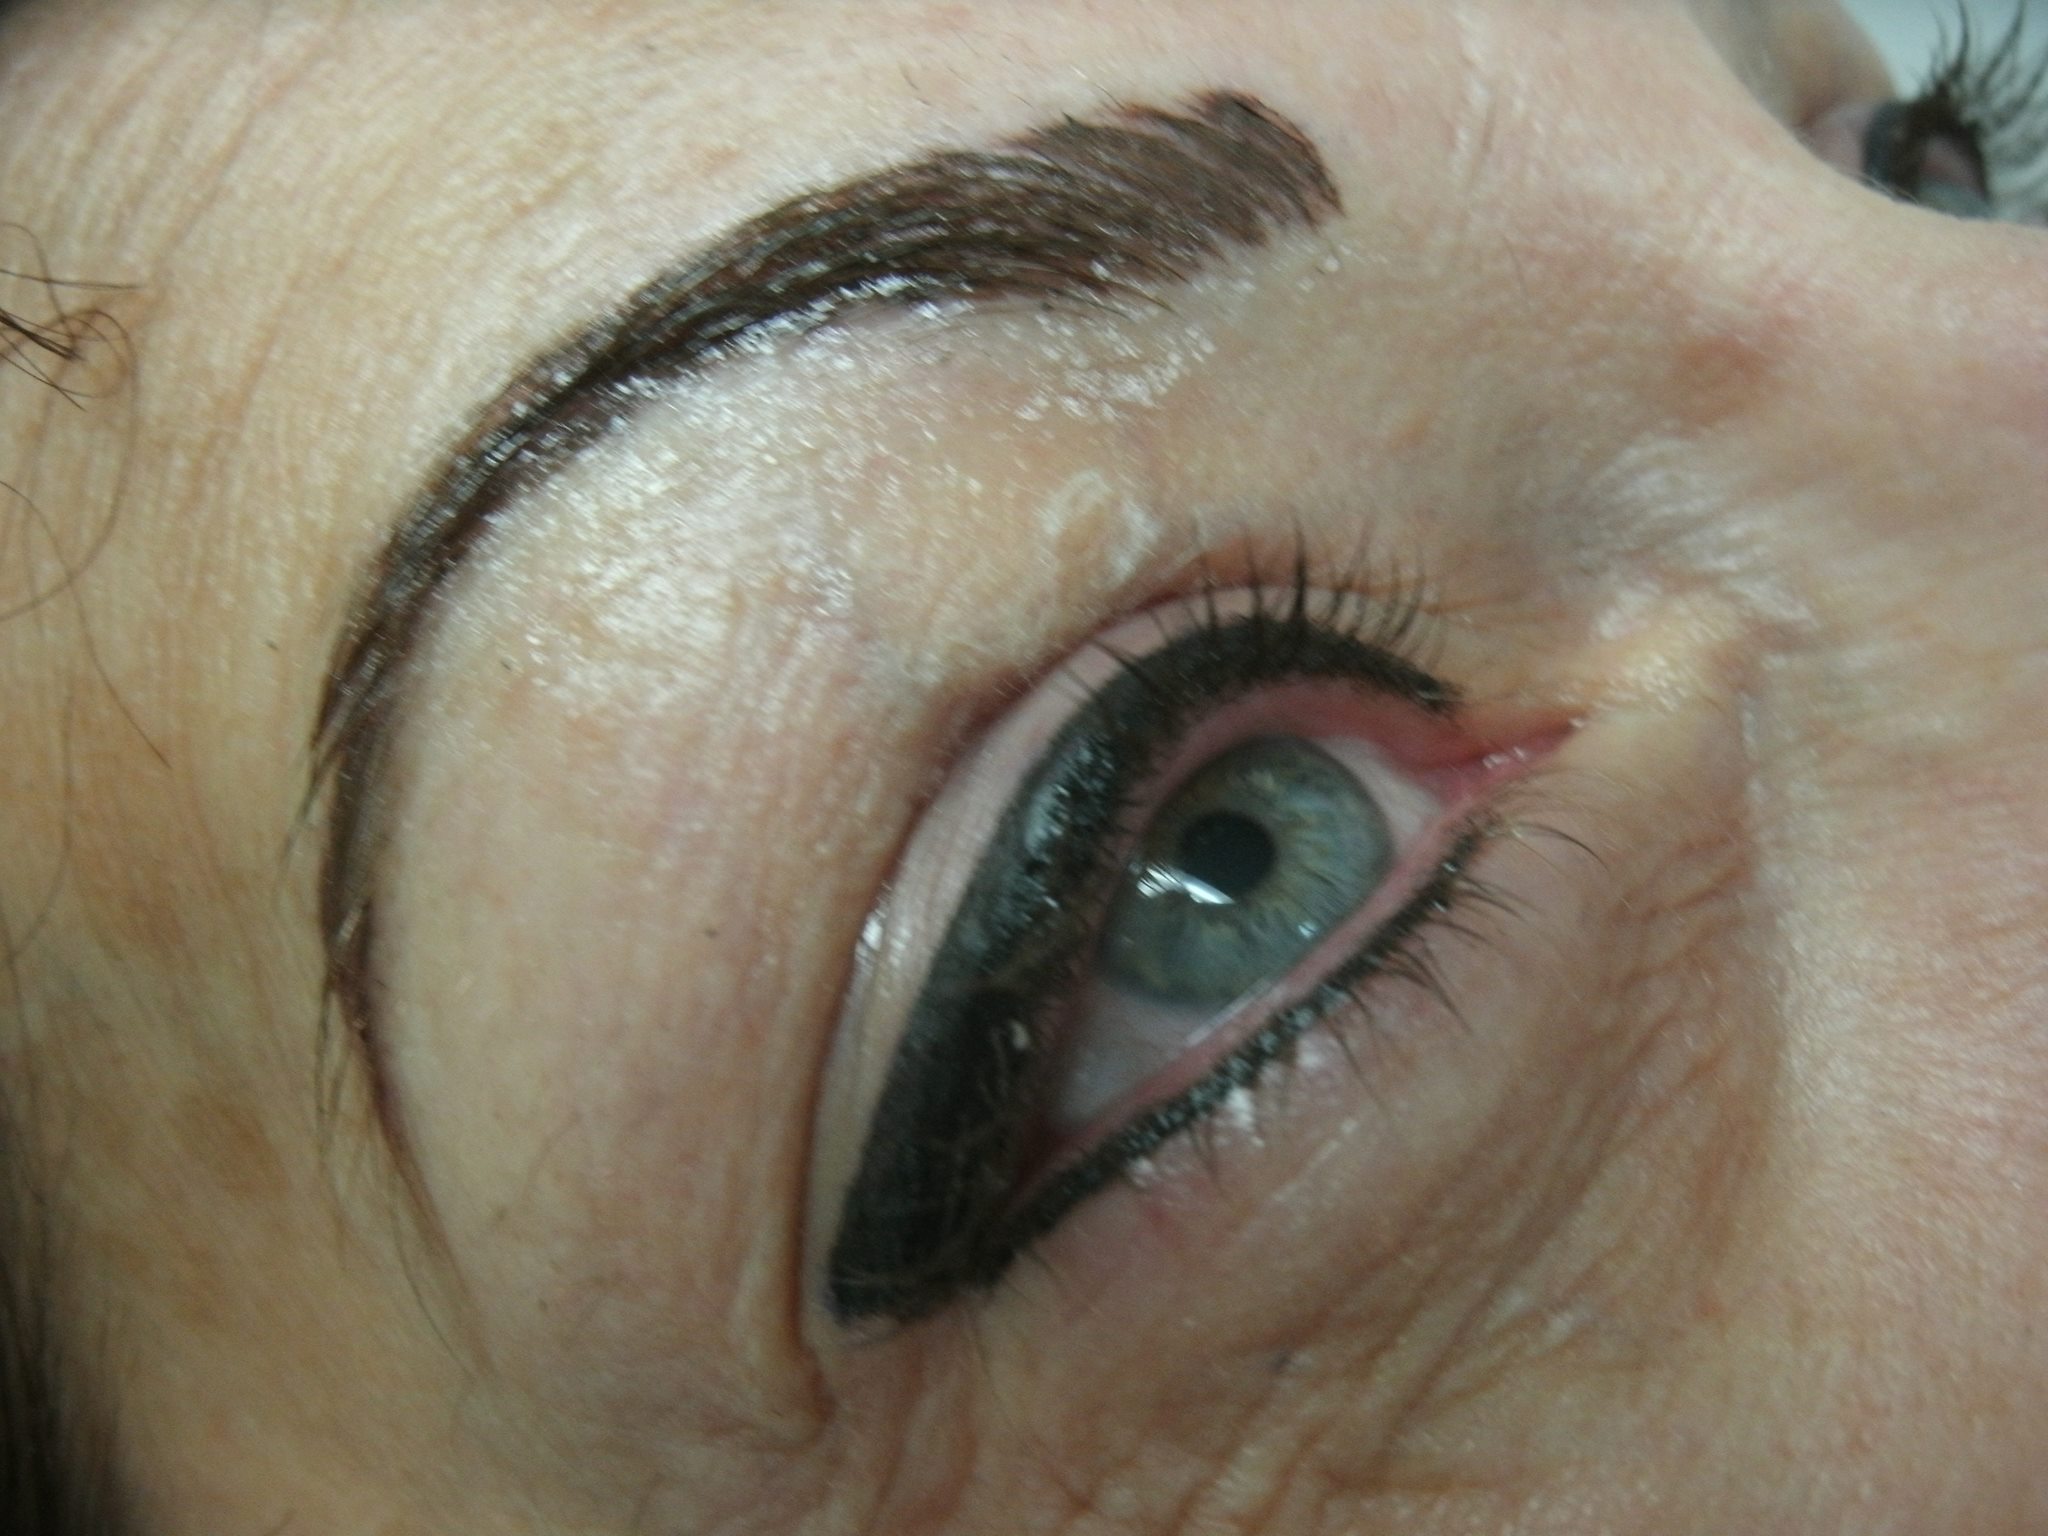  Professional Permanent Eyeliner near Eau Claire, Wisconsin